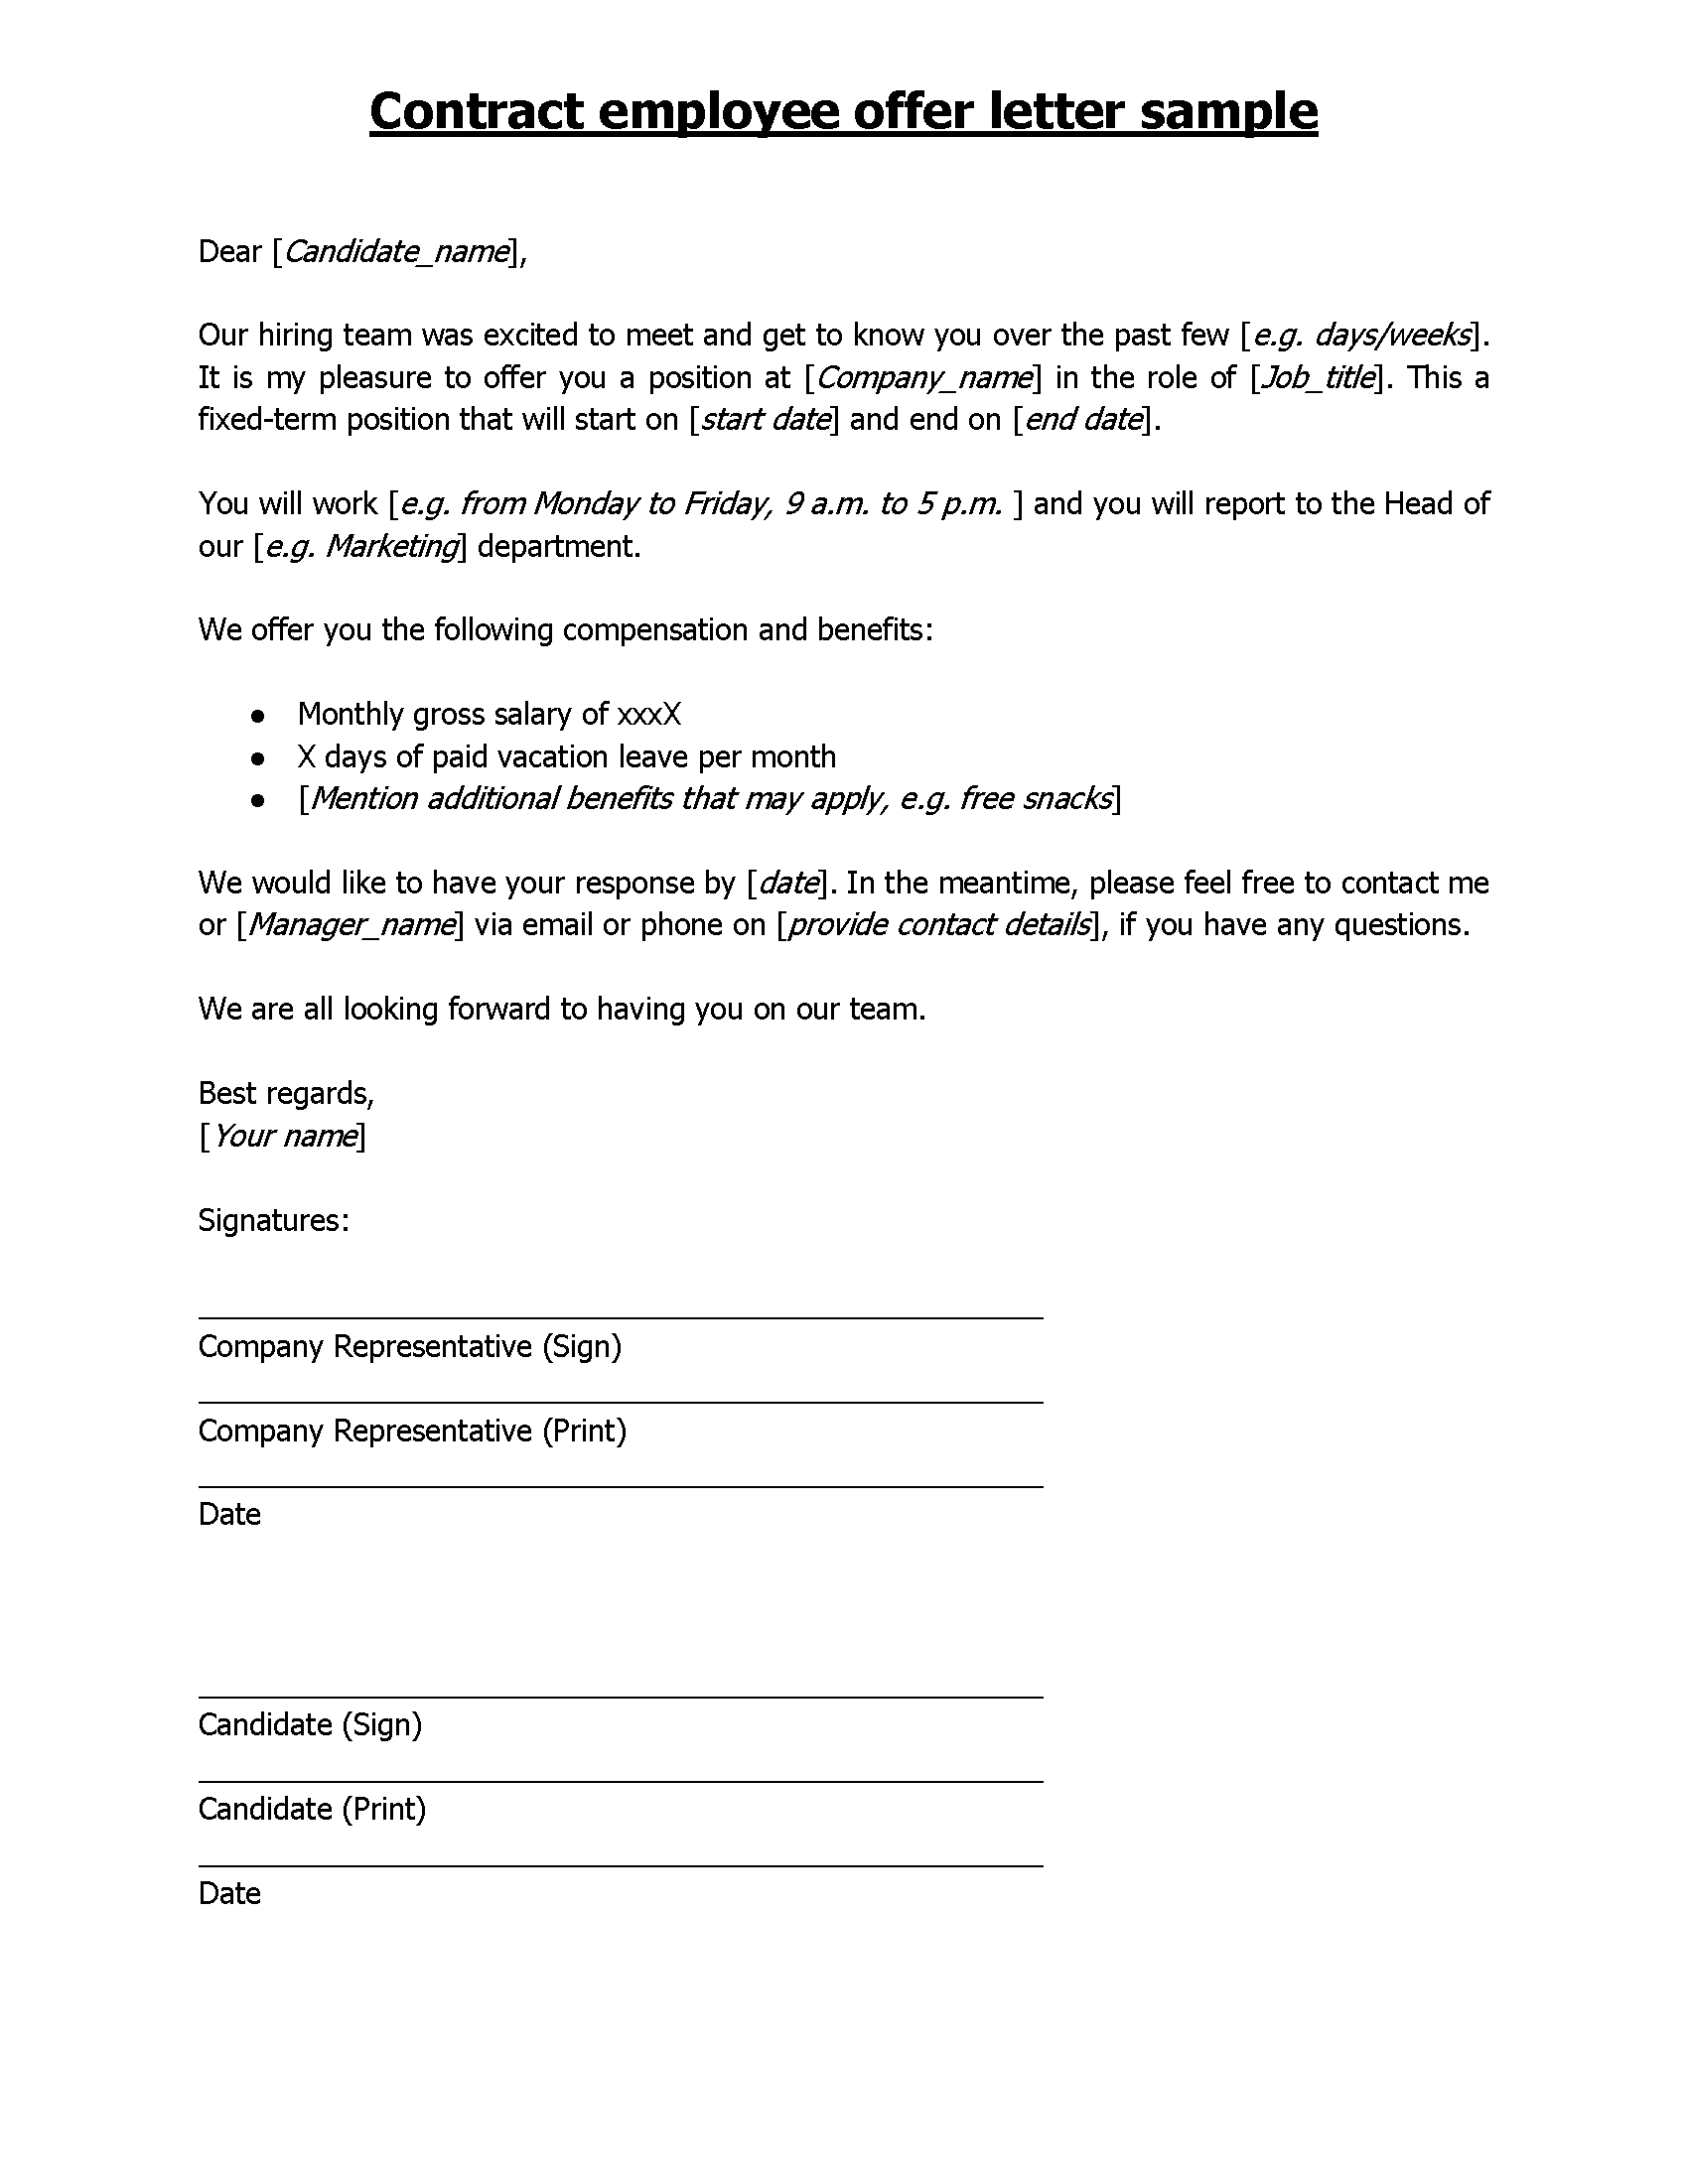 Contract-Employee-Offer-Letter-Sample